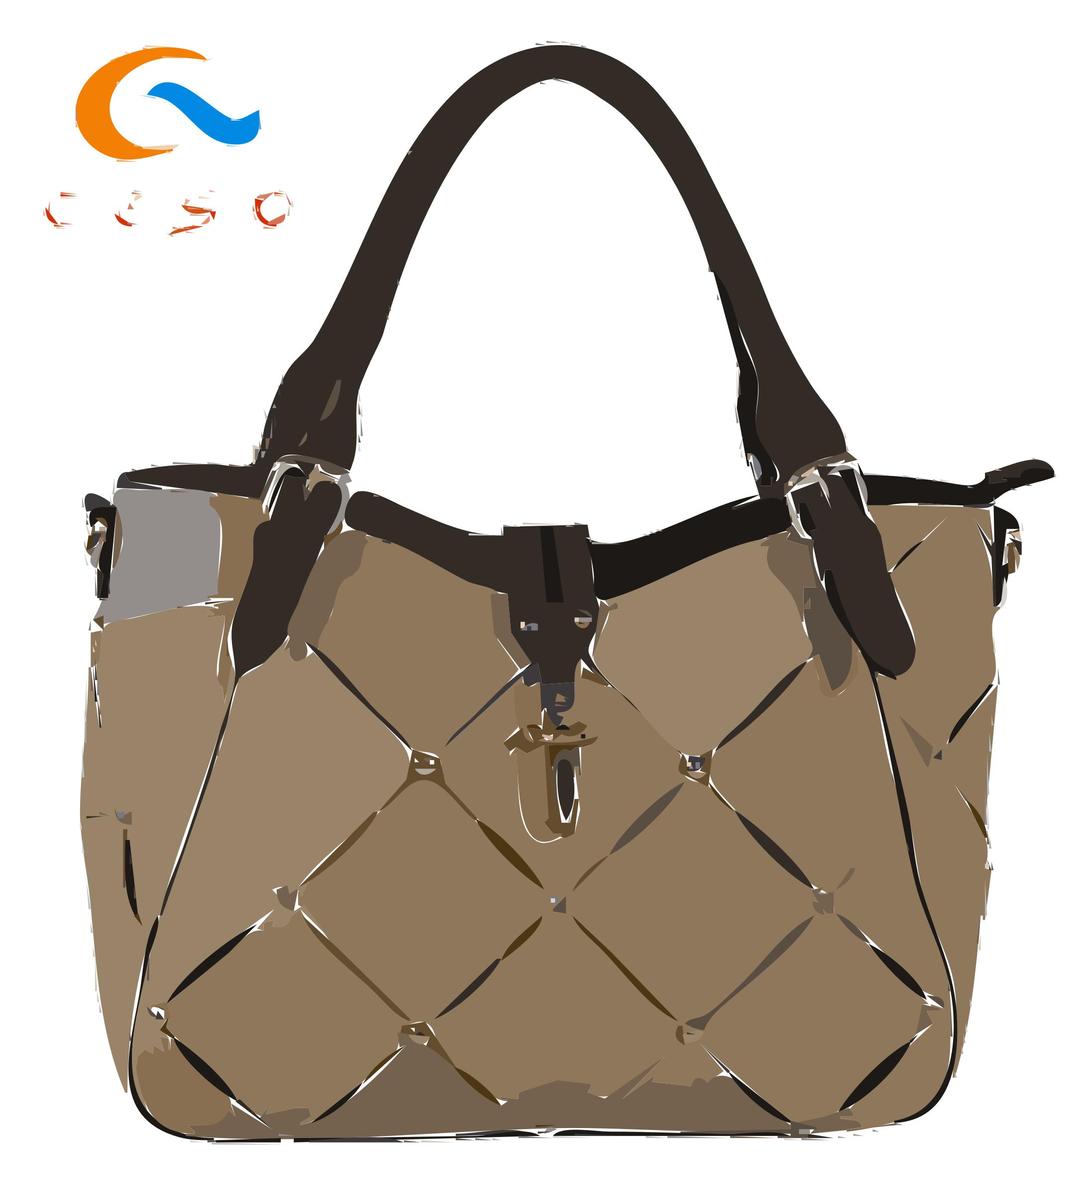 Crisscross Leather Bag with Logo png transparent